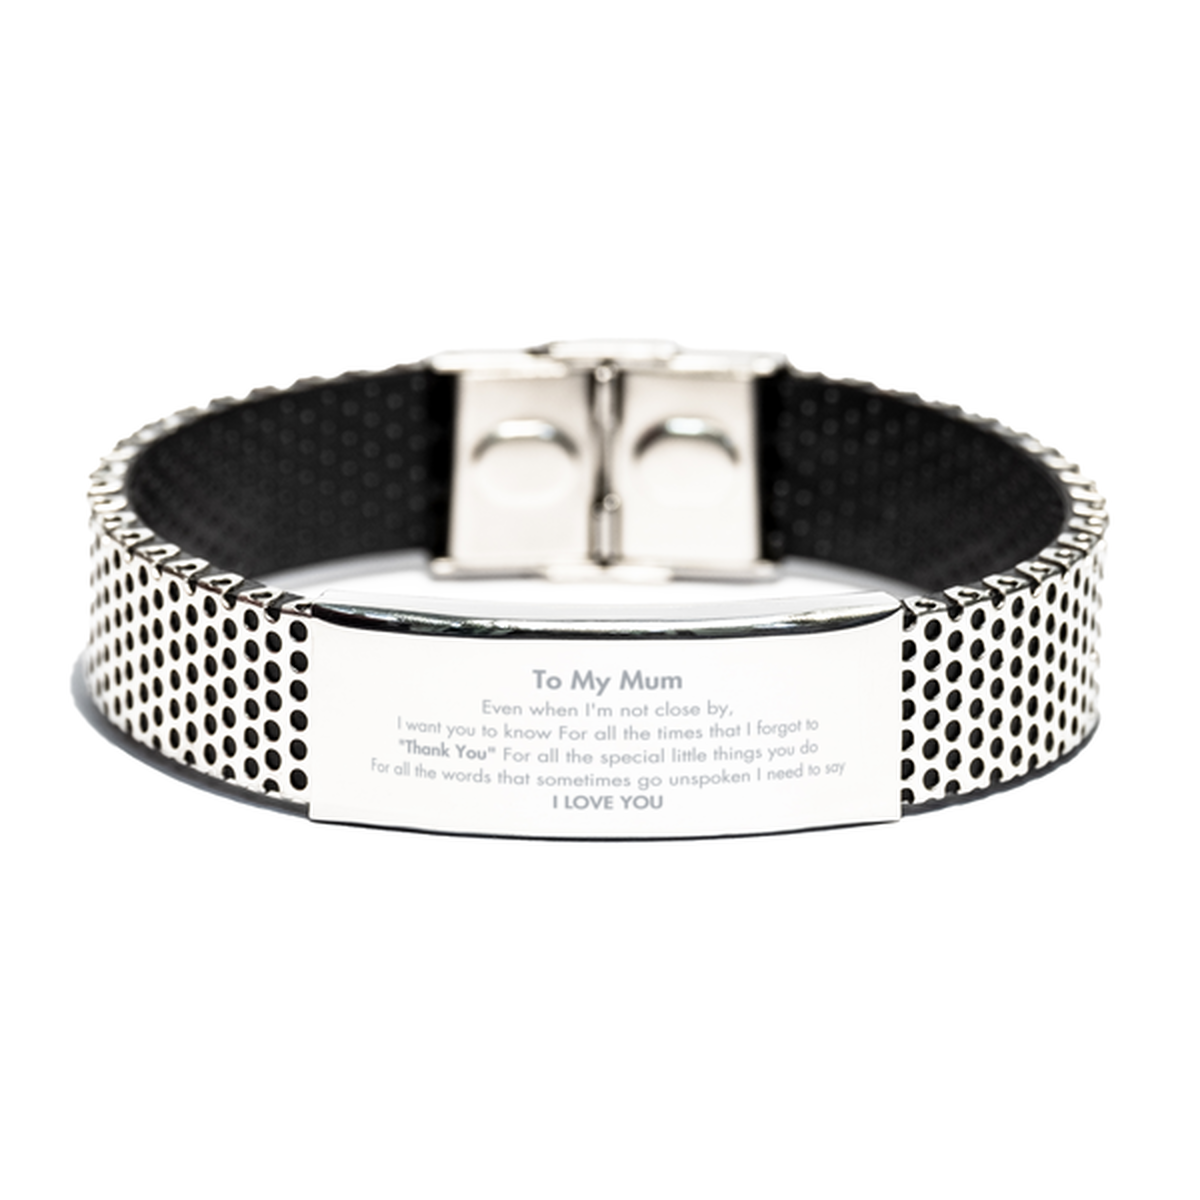 Thank You Gifts for Mum, Keepsake Stainless Steel Bracelet Gifts for Mum Birthday Mother's day Father's Day Mum For all the words That sometimes go unspoken I need to say I LOVE YOU